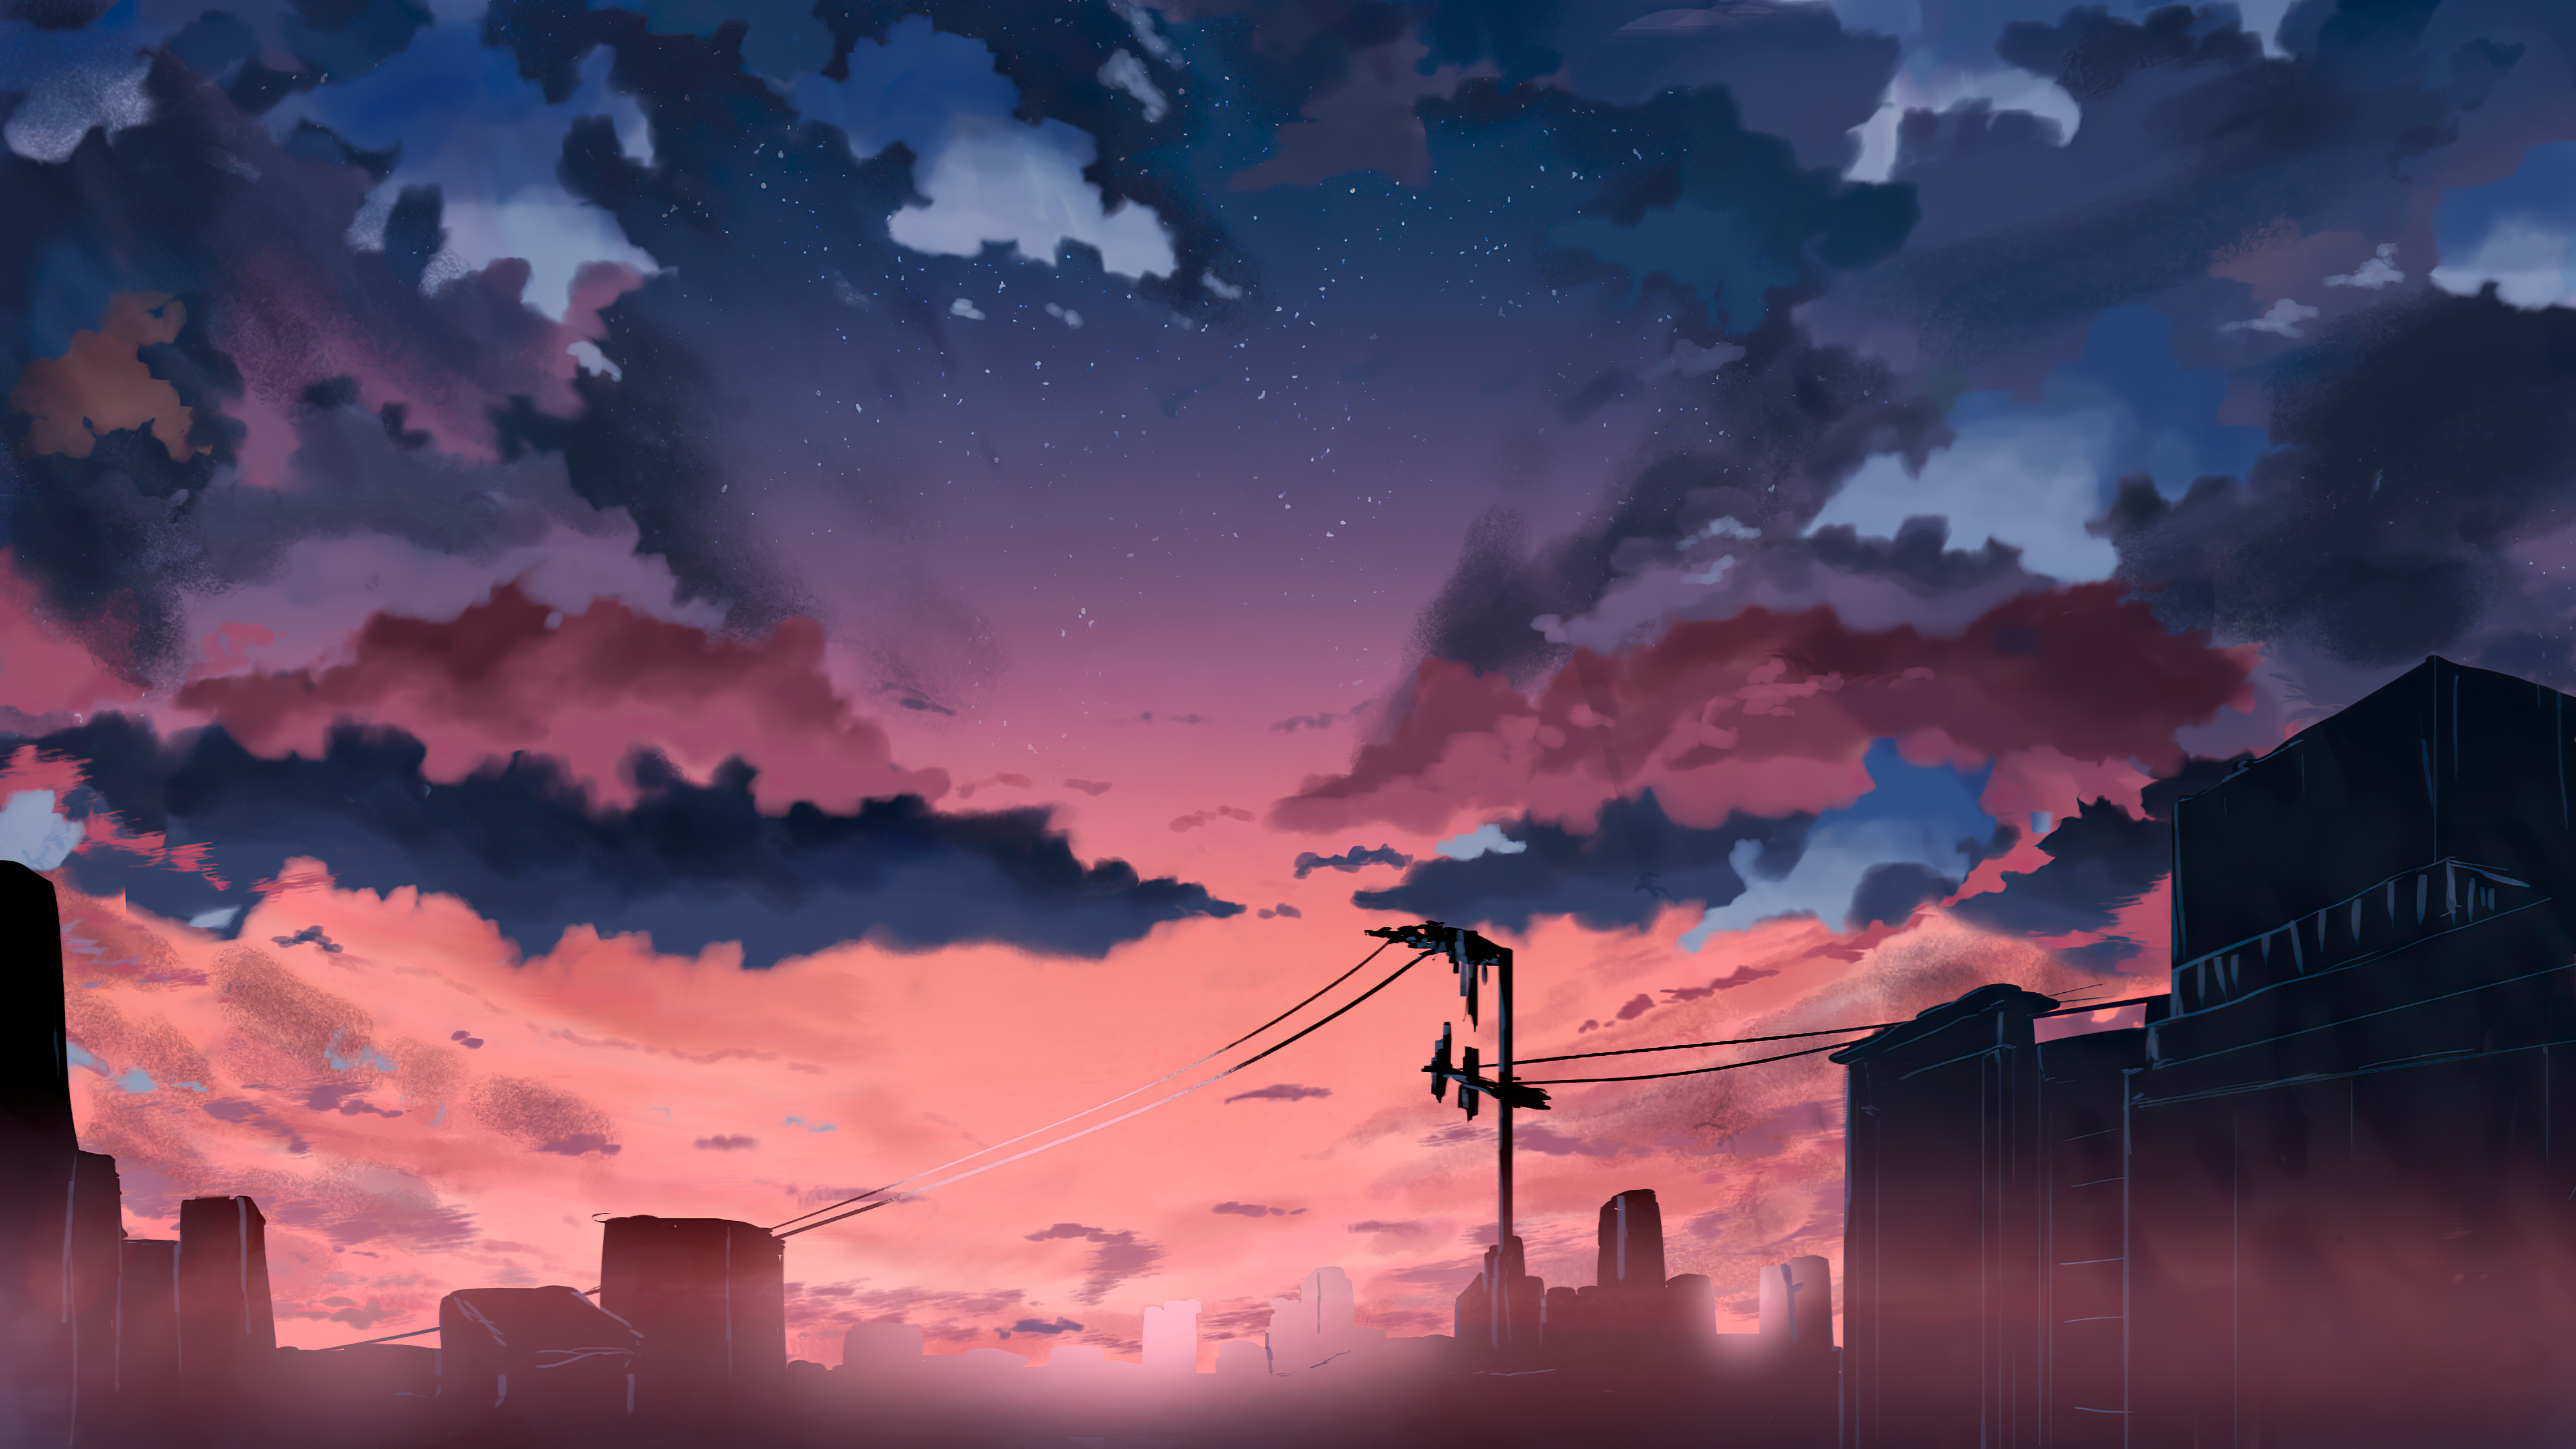 Sunset Clouds Anime IPhone Wallpaper HD IPhone Wallpapers Wallpaper  Download  MOONAZ